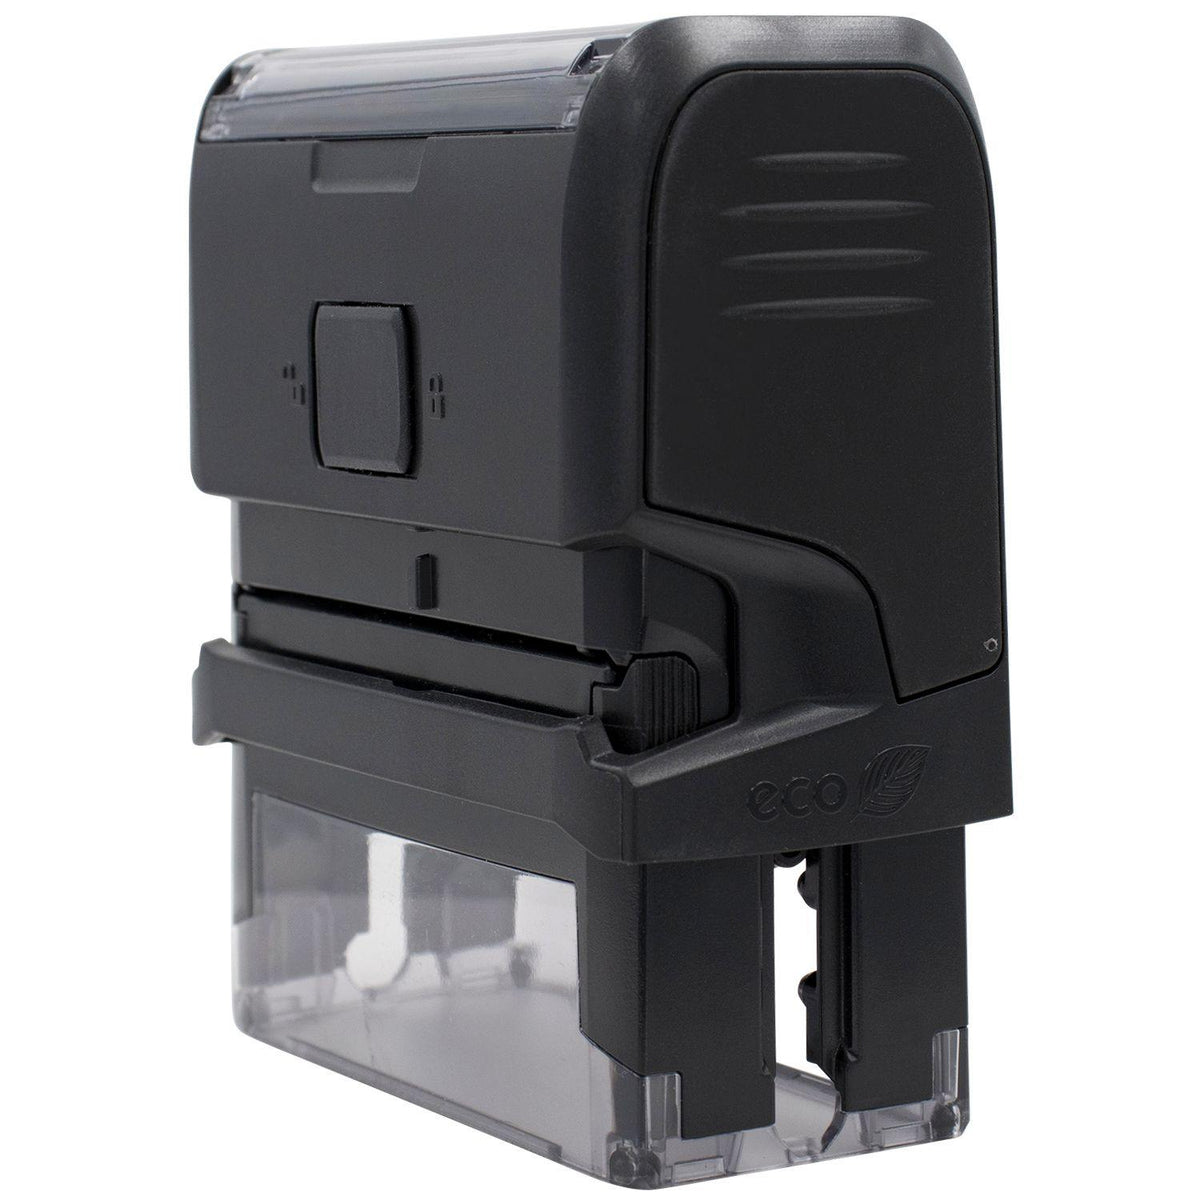 Self Inking Dismissal Stamp - Engineer Seal Stamps - Brand_Trodat, Impression Size_Small, Stamp Type_Self-Inking Stamp, Type of Use_Medical Office